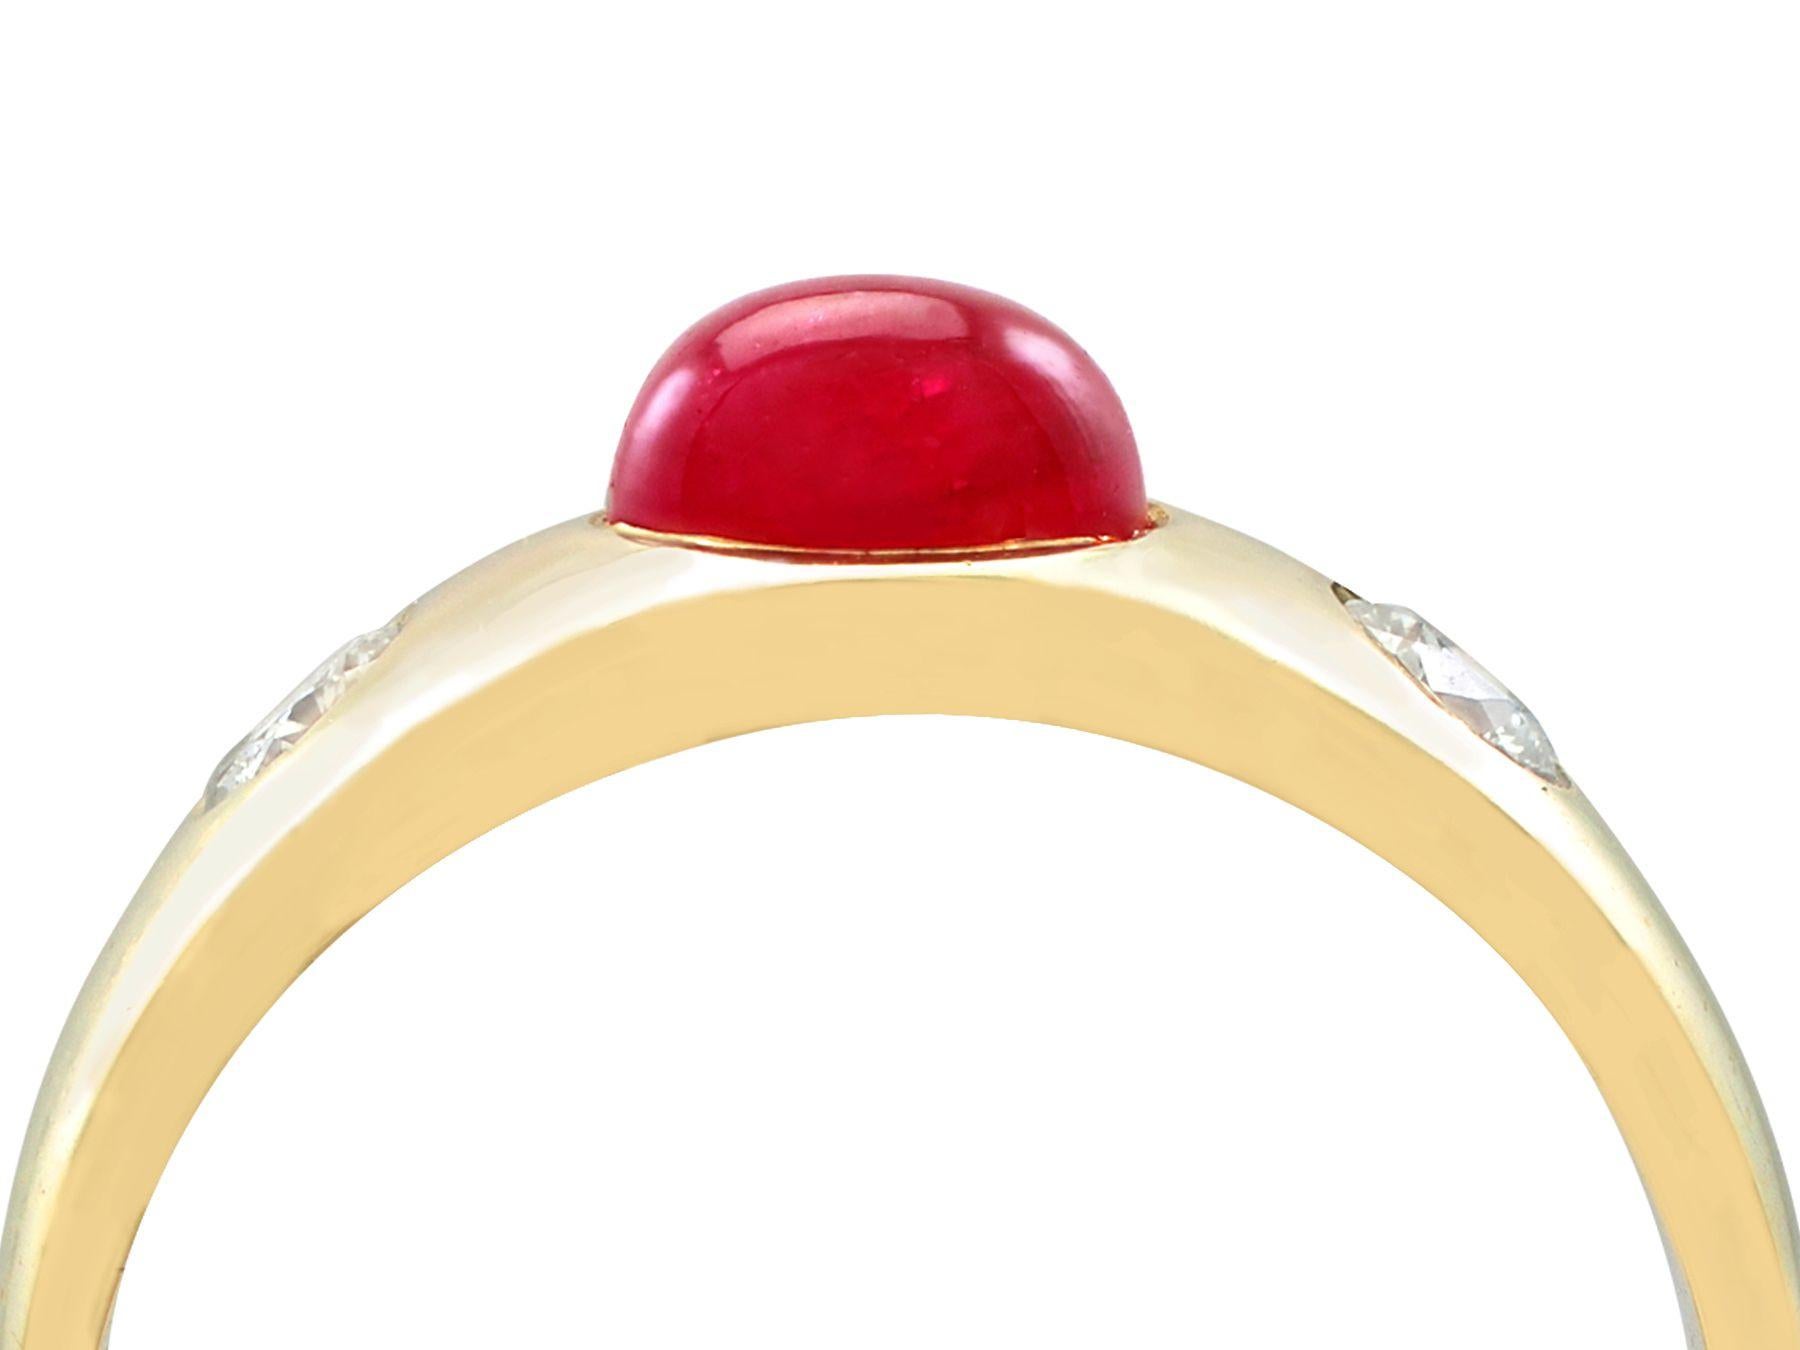 An impressive vintage 1980s 1.29 carat ruby and 0.42 carat diamond, 14 karat yellow gold trilogy ring; part of our diverse vintage jewelry and estate jewelry collections.

This fine and impressive vintage cabochon cut ruby ring has been crafted in